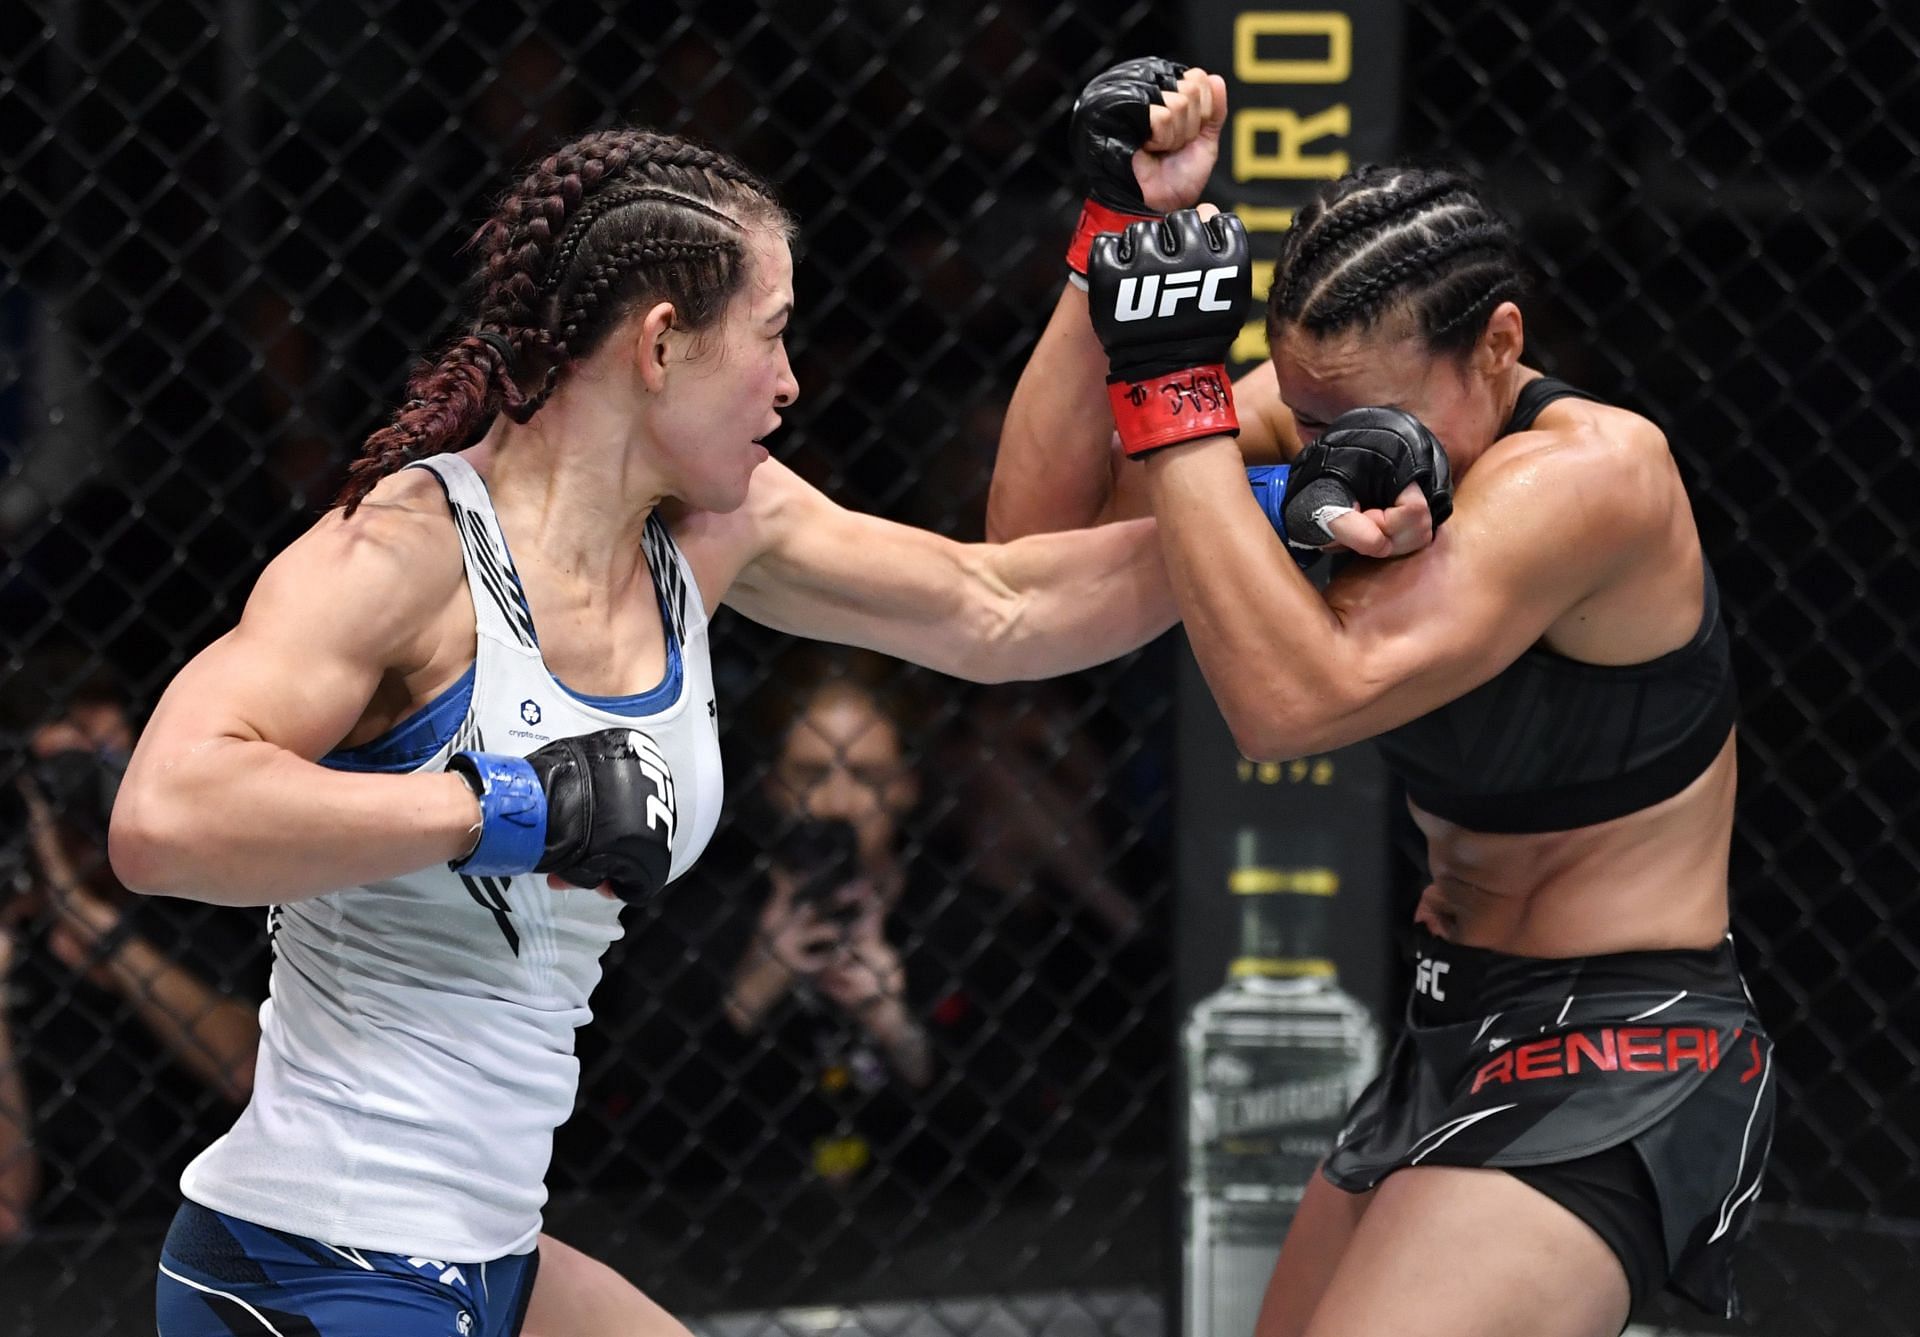 Miesha Tate looked better than ever in her recent comeback fight with Marion Reneau